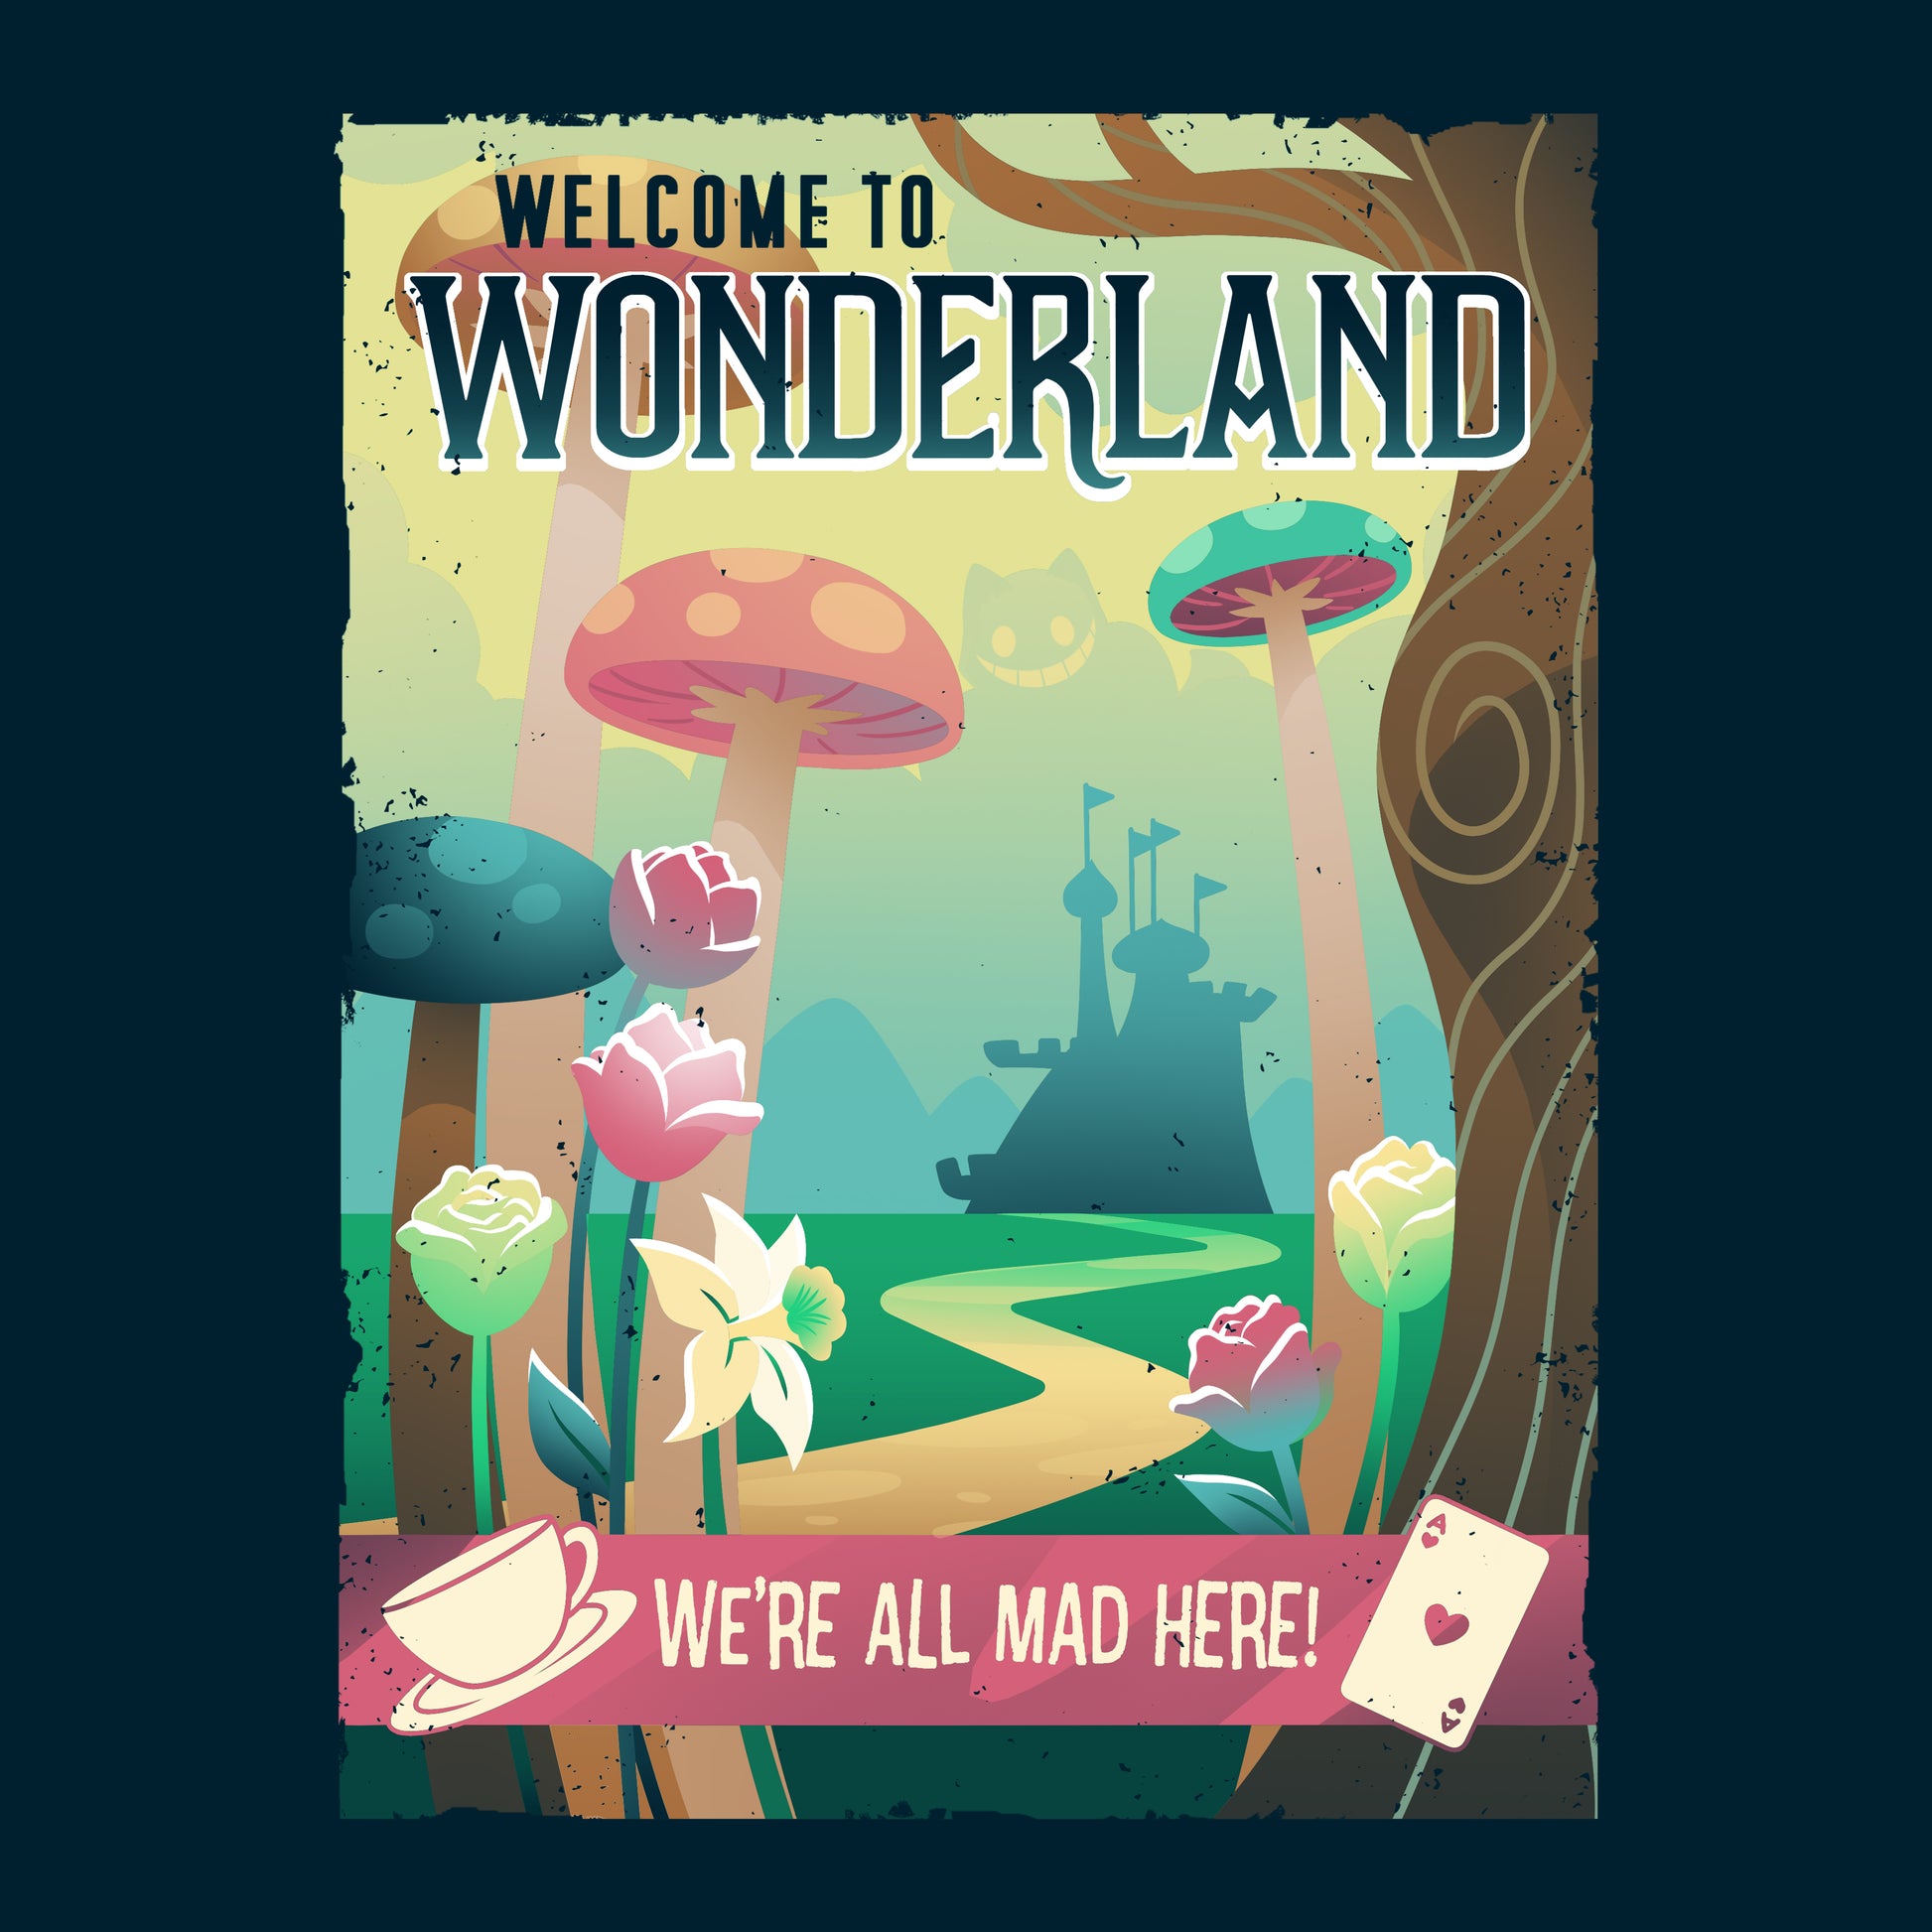 A Disney Wonderland Travel Poster welcoming you to Wonderland, where we're all mad here.